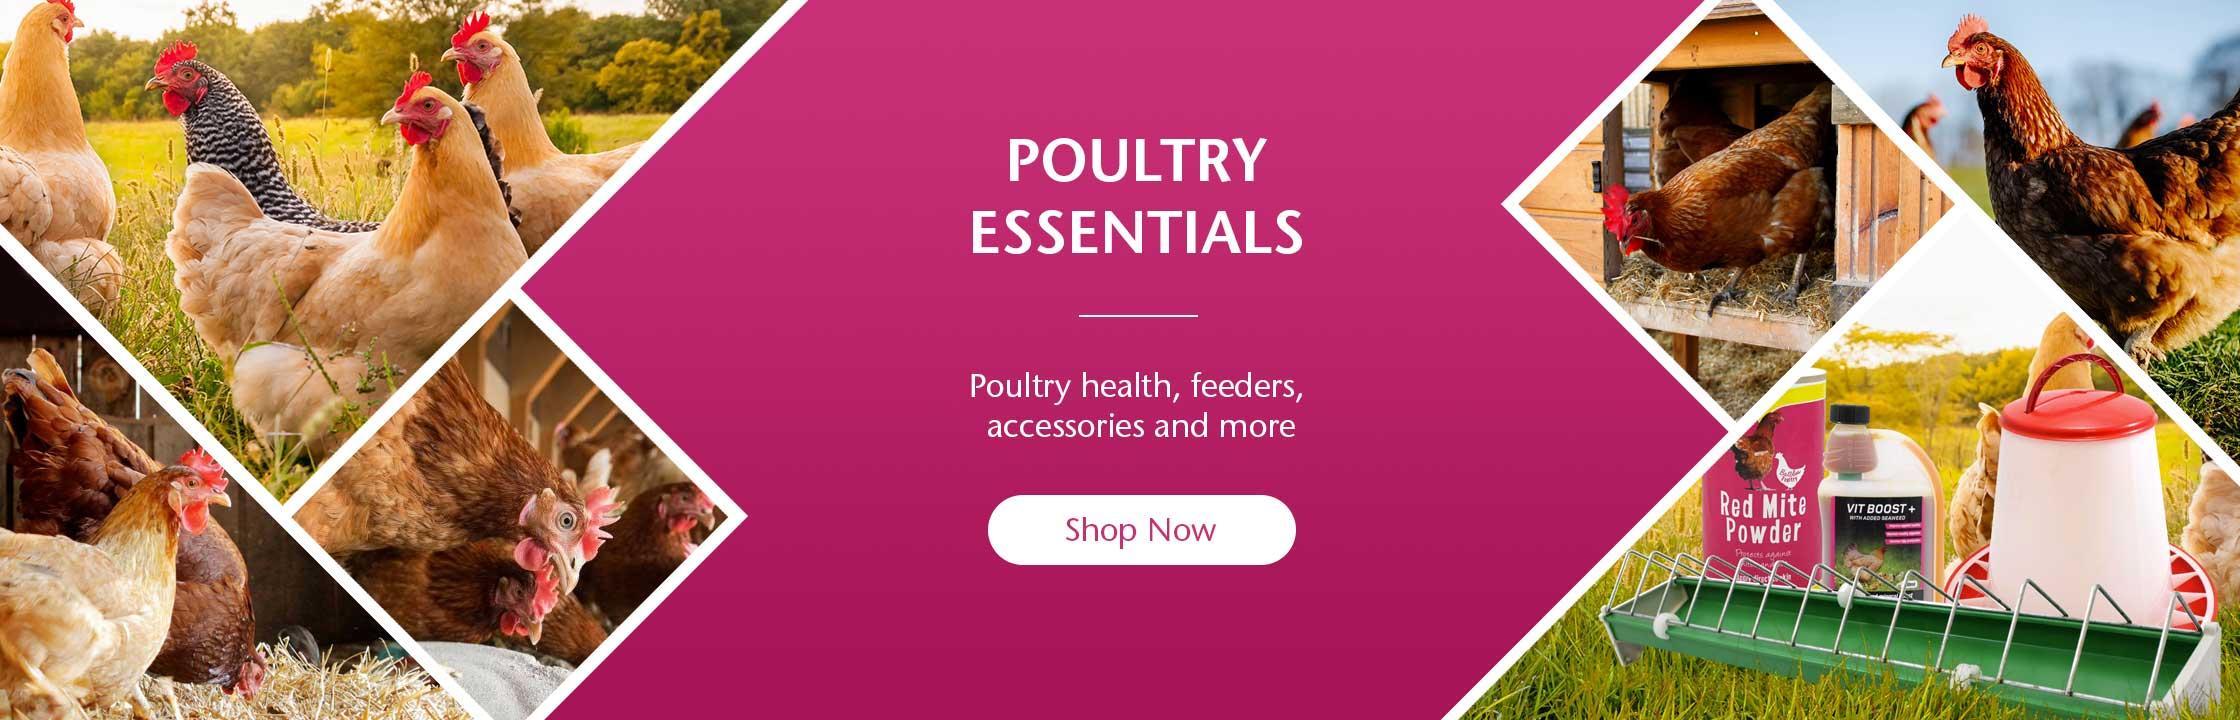 Poultry Essentials